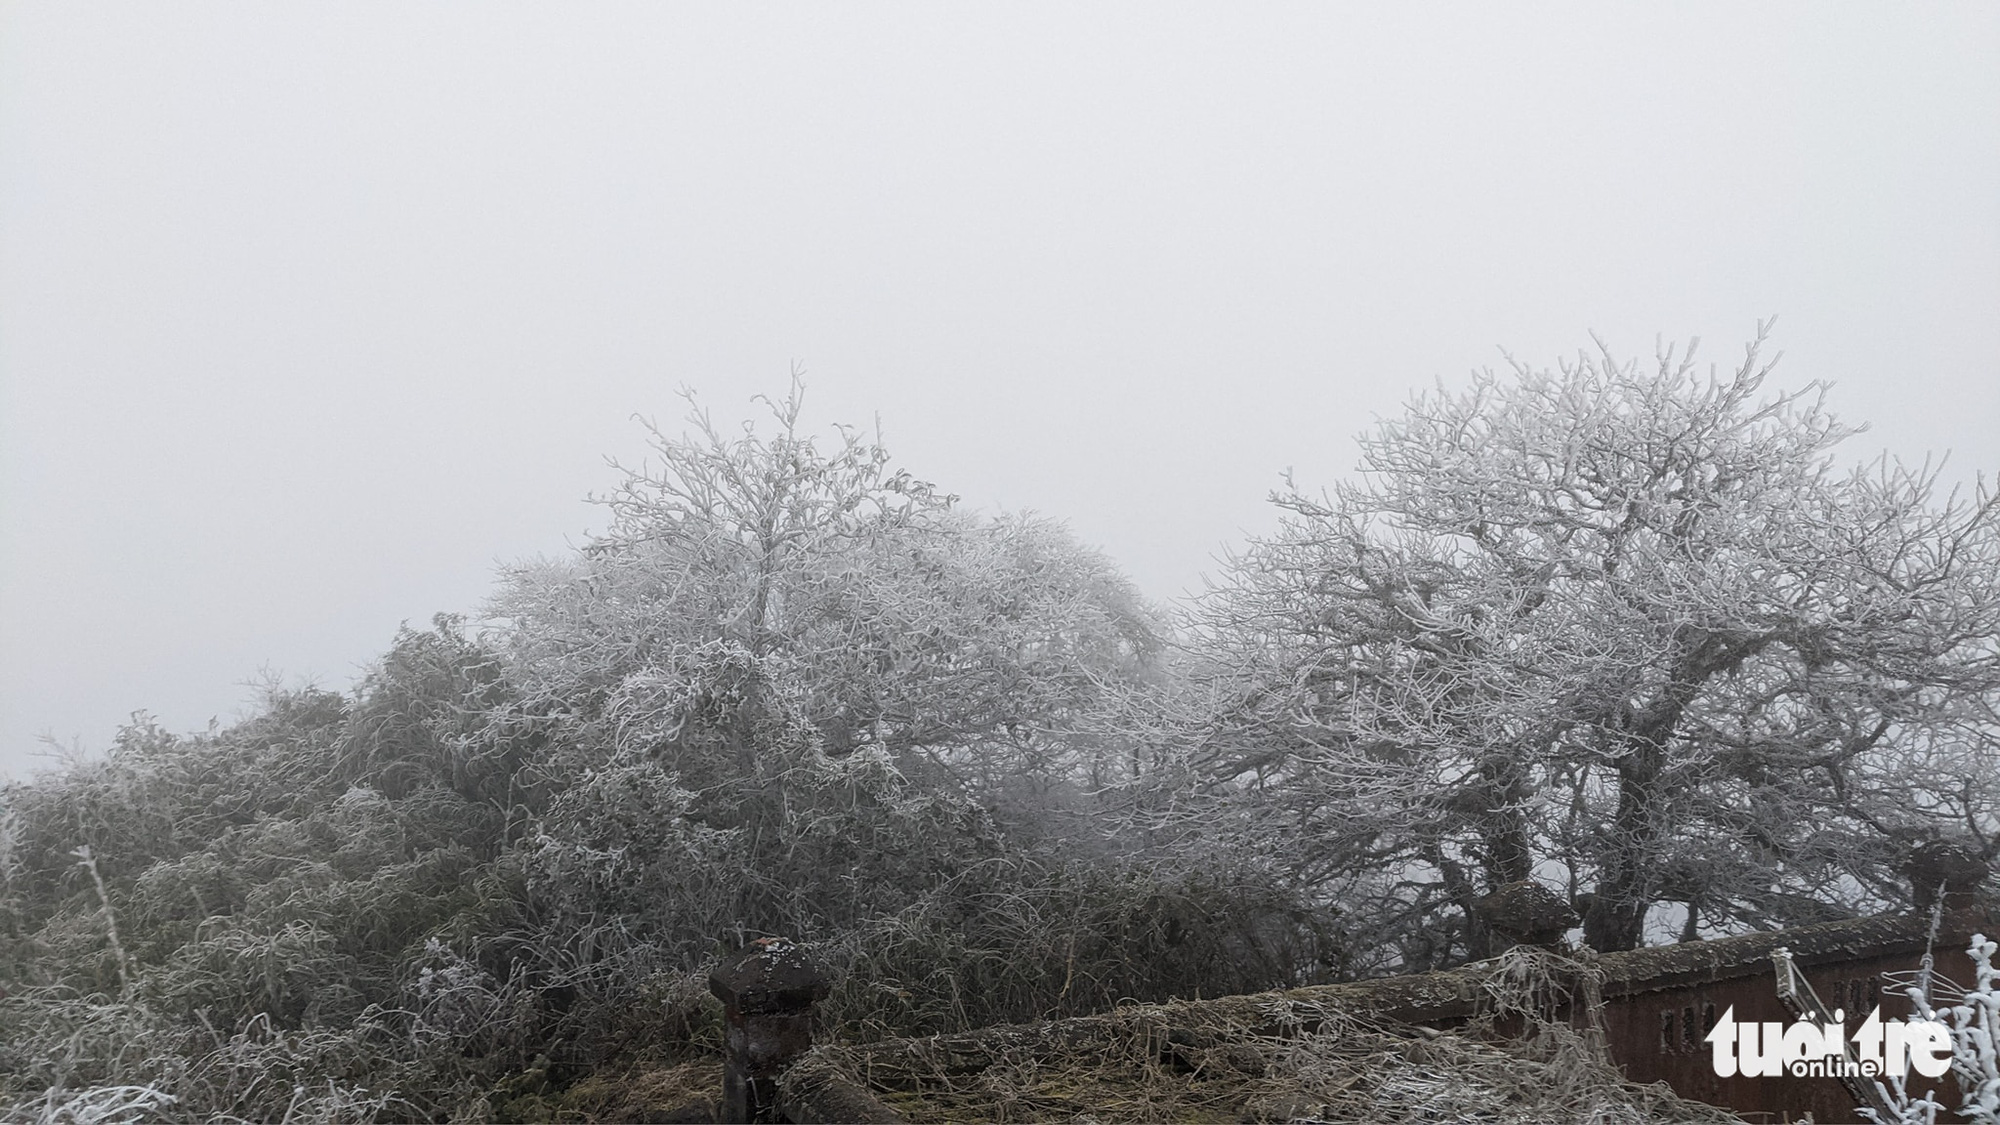 Frost covers tree branches on Phja Oac Mountain in Cao Bang Province, Vietnam, January 8, 2021. Photo: Ha Cuong / Tuoi Tre